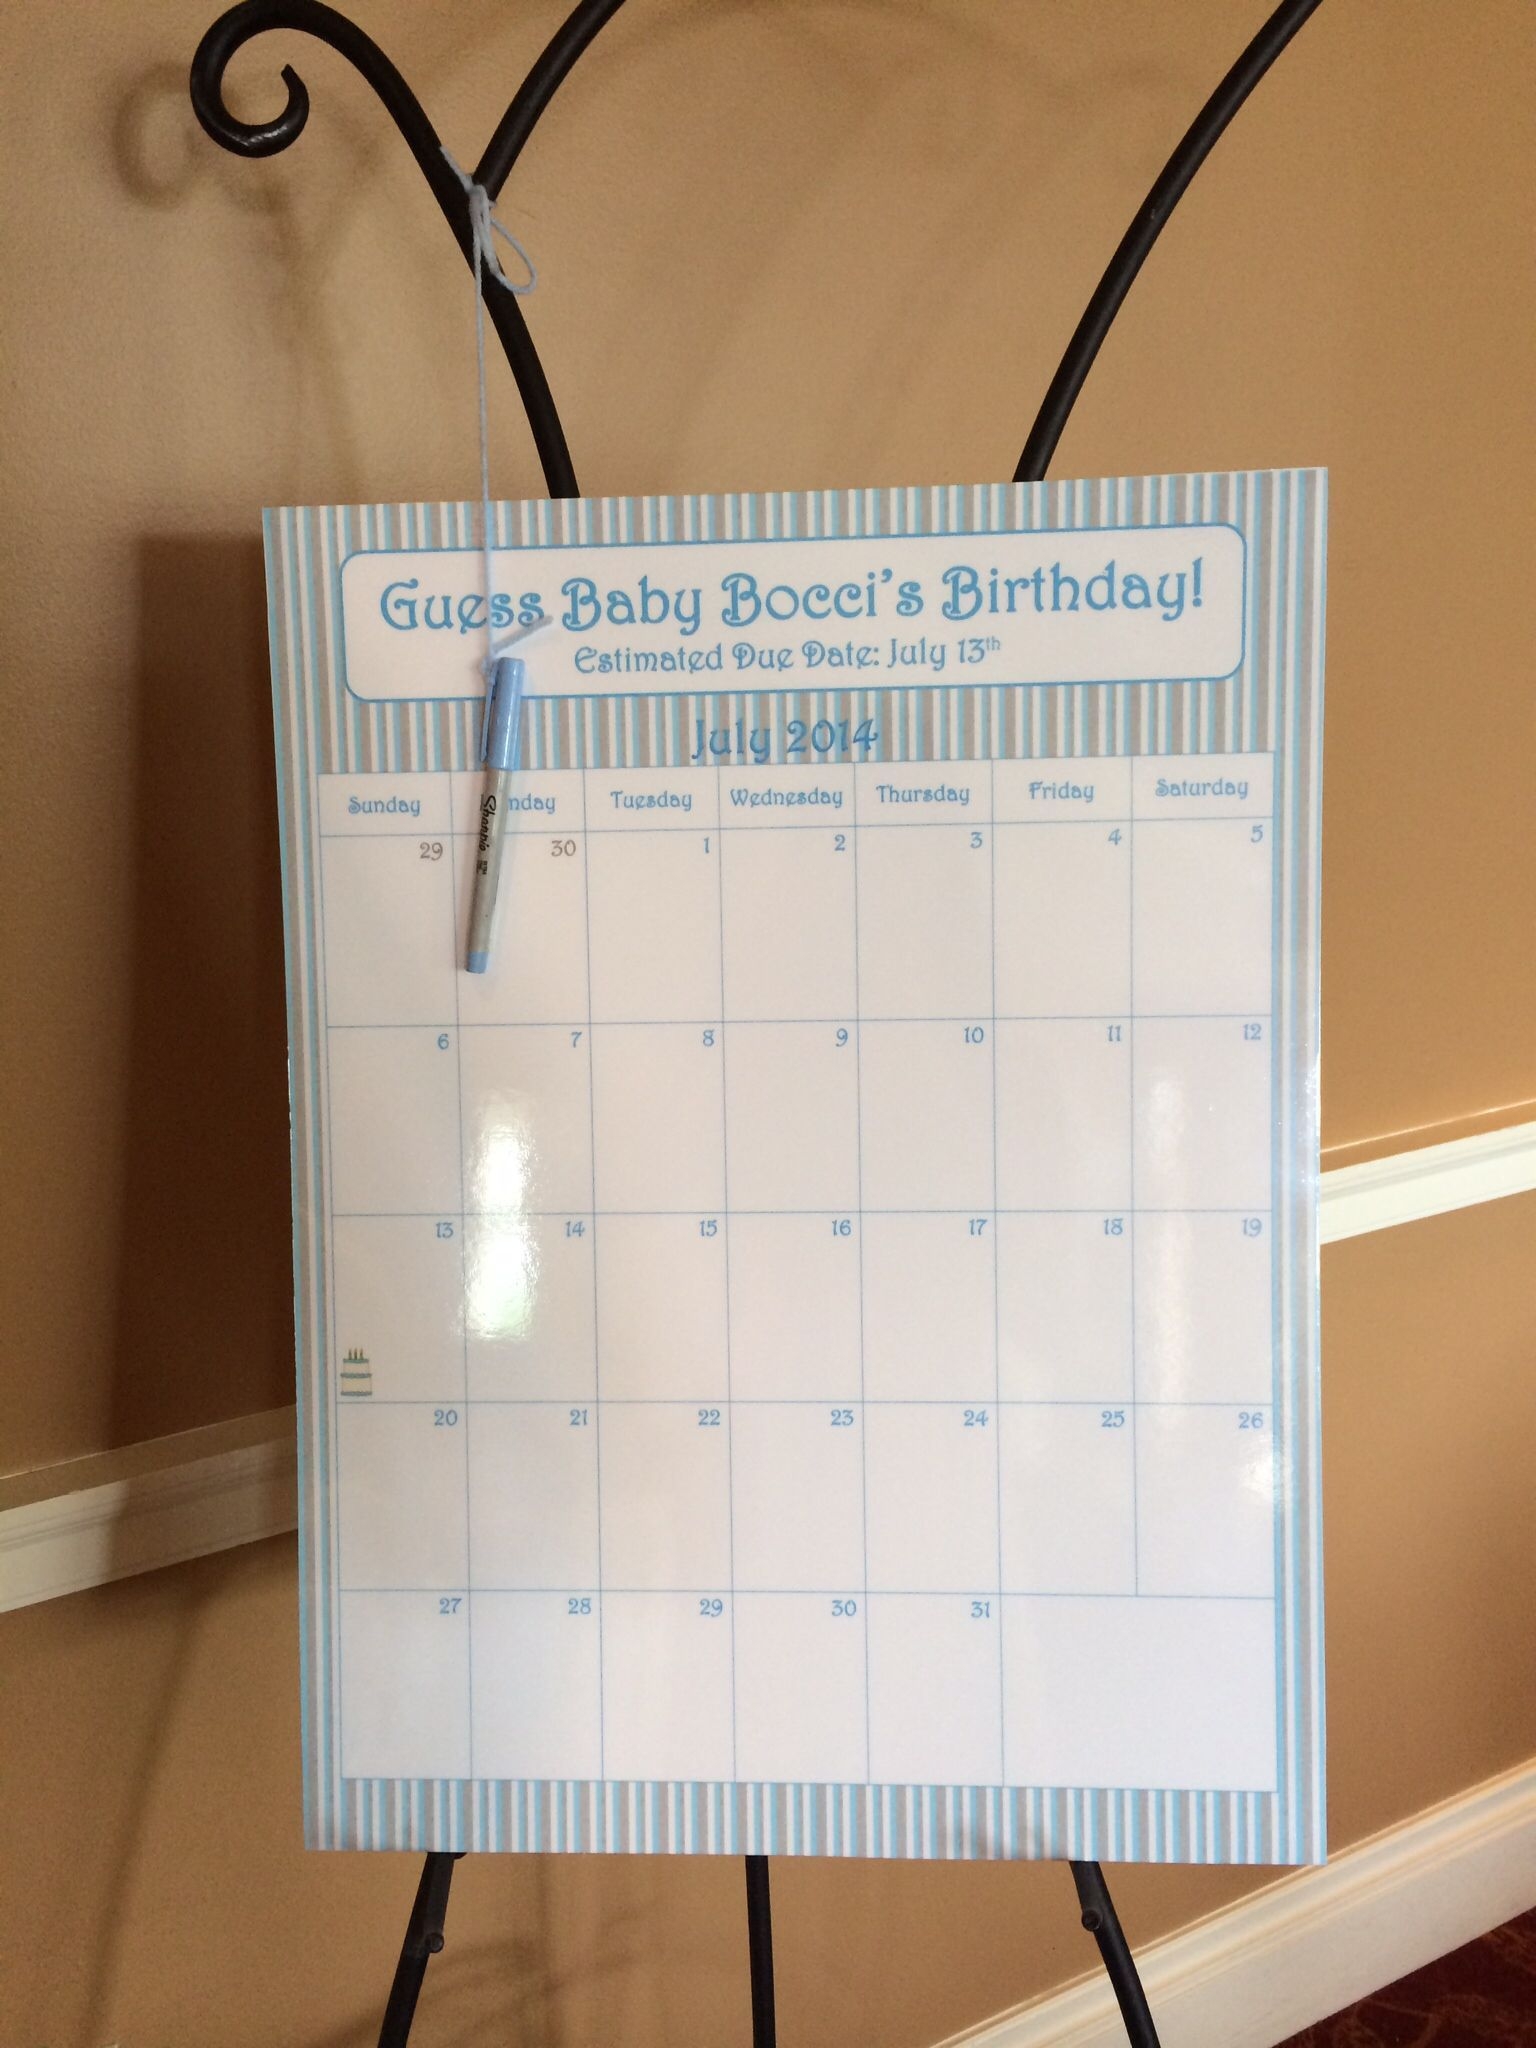 Guess Baby's Birthday Poster Board | Guess Baby Birthday